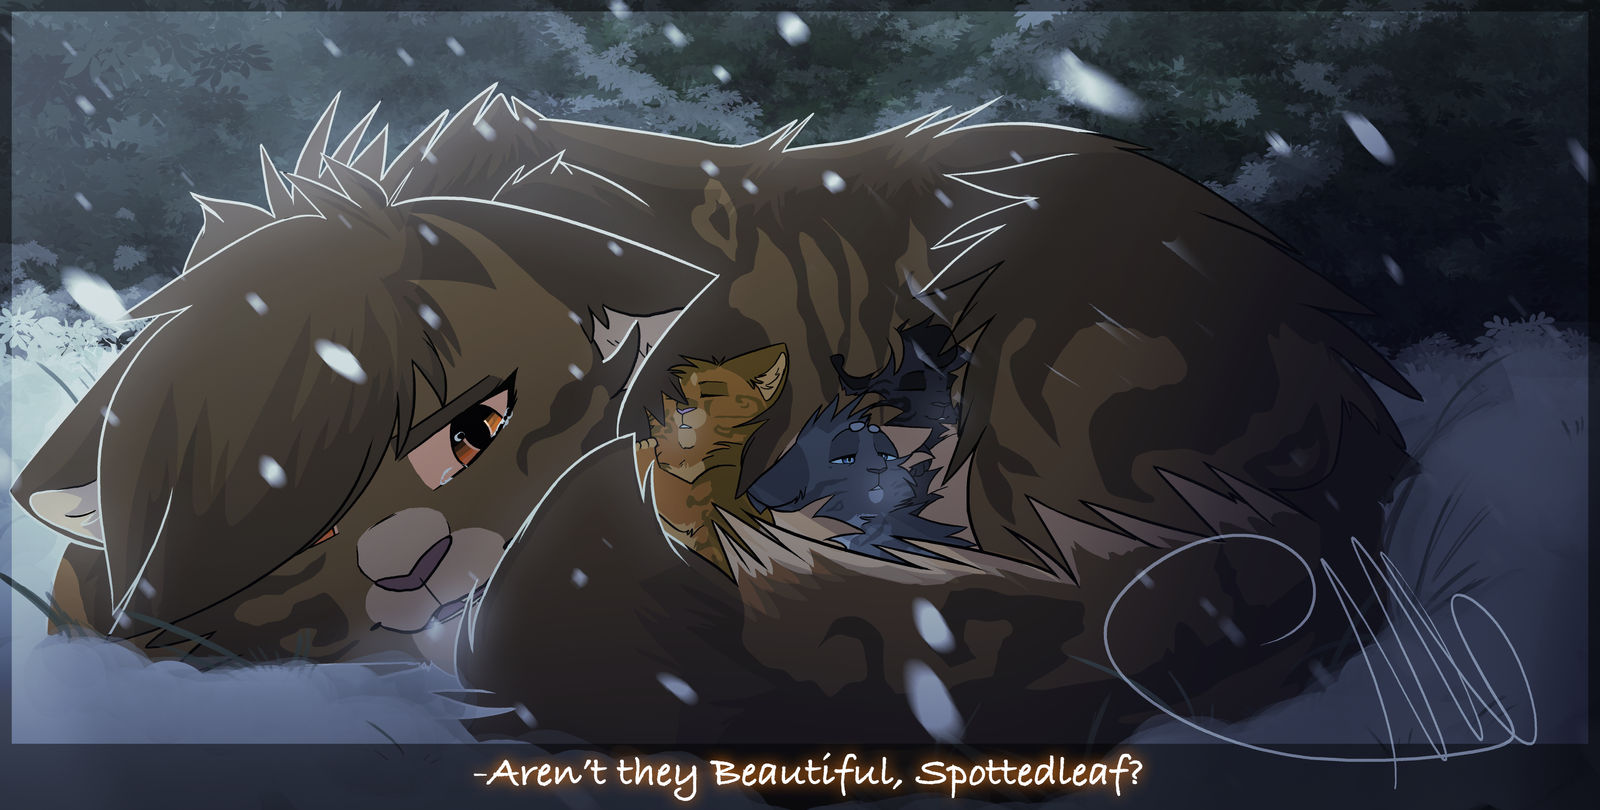 {WC}Aren't they beautiful, Spottedleaf?